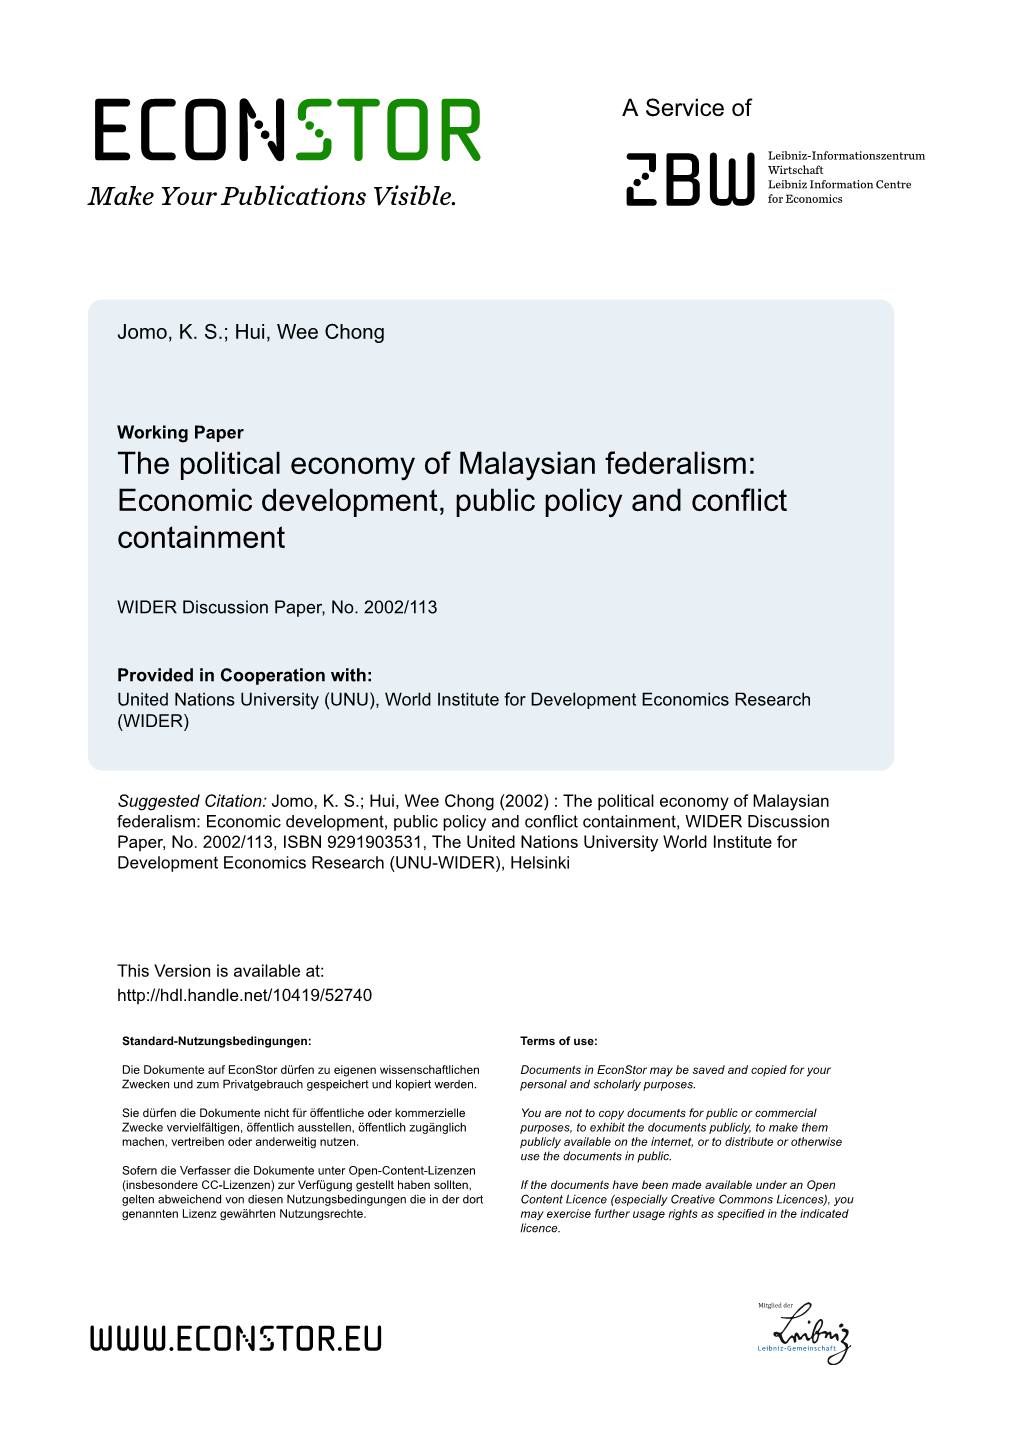 The Political Economy of Malaysian Federalism: Economic Development, Public Policy and Conflict Containment